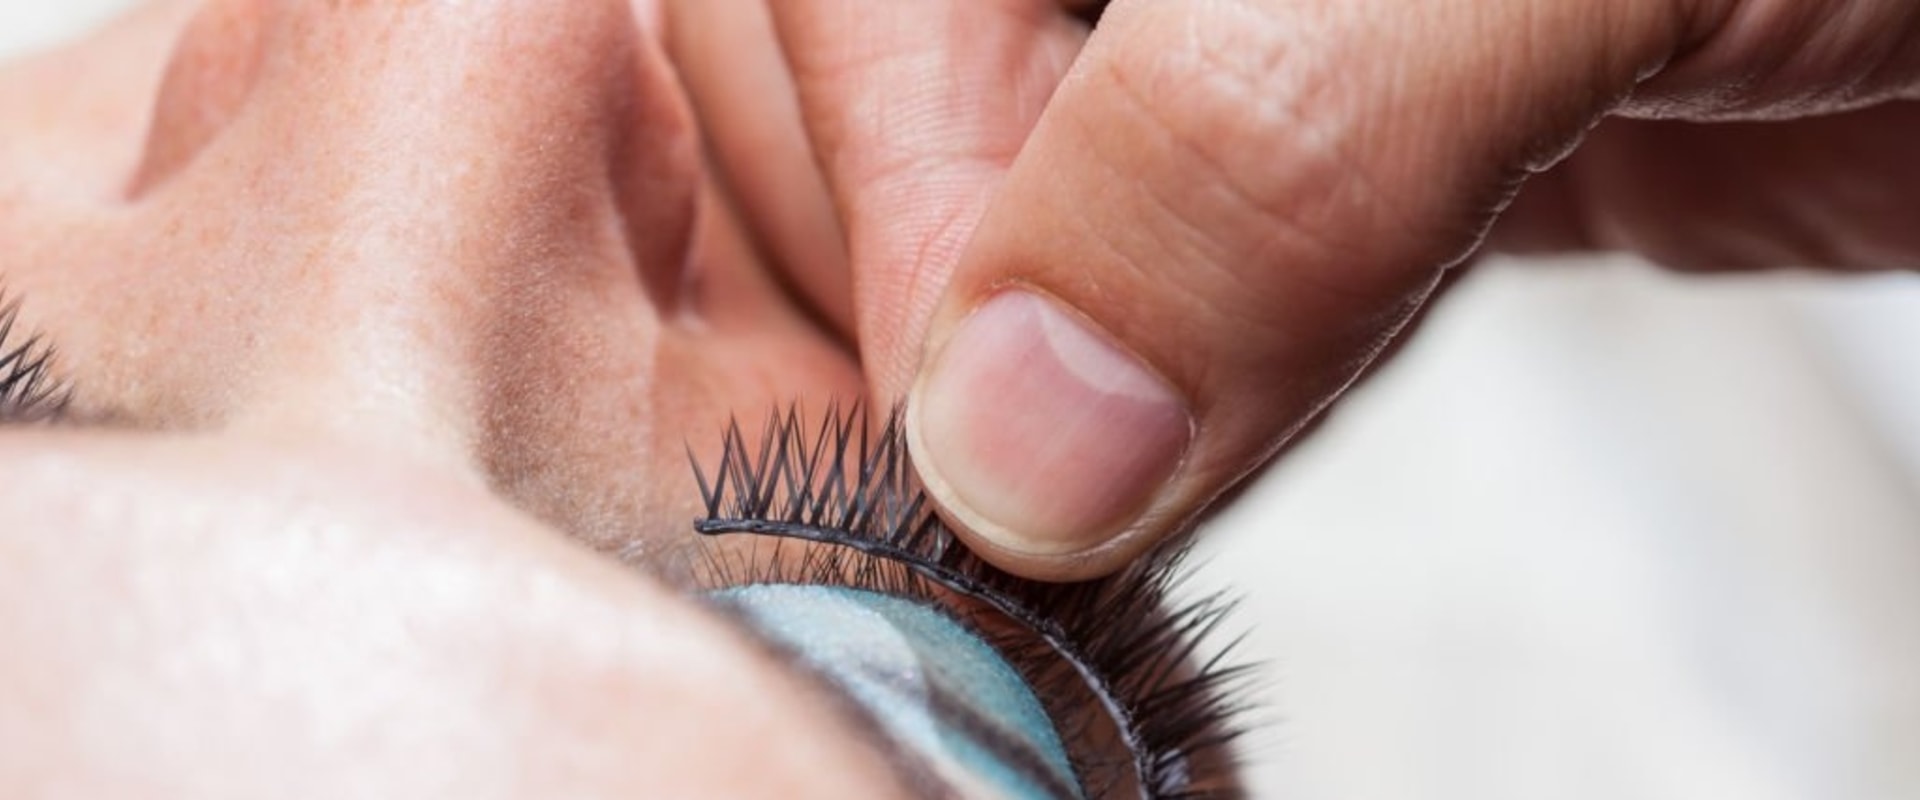 What are the side effects of magnetic eyelashes?